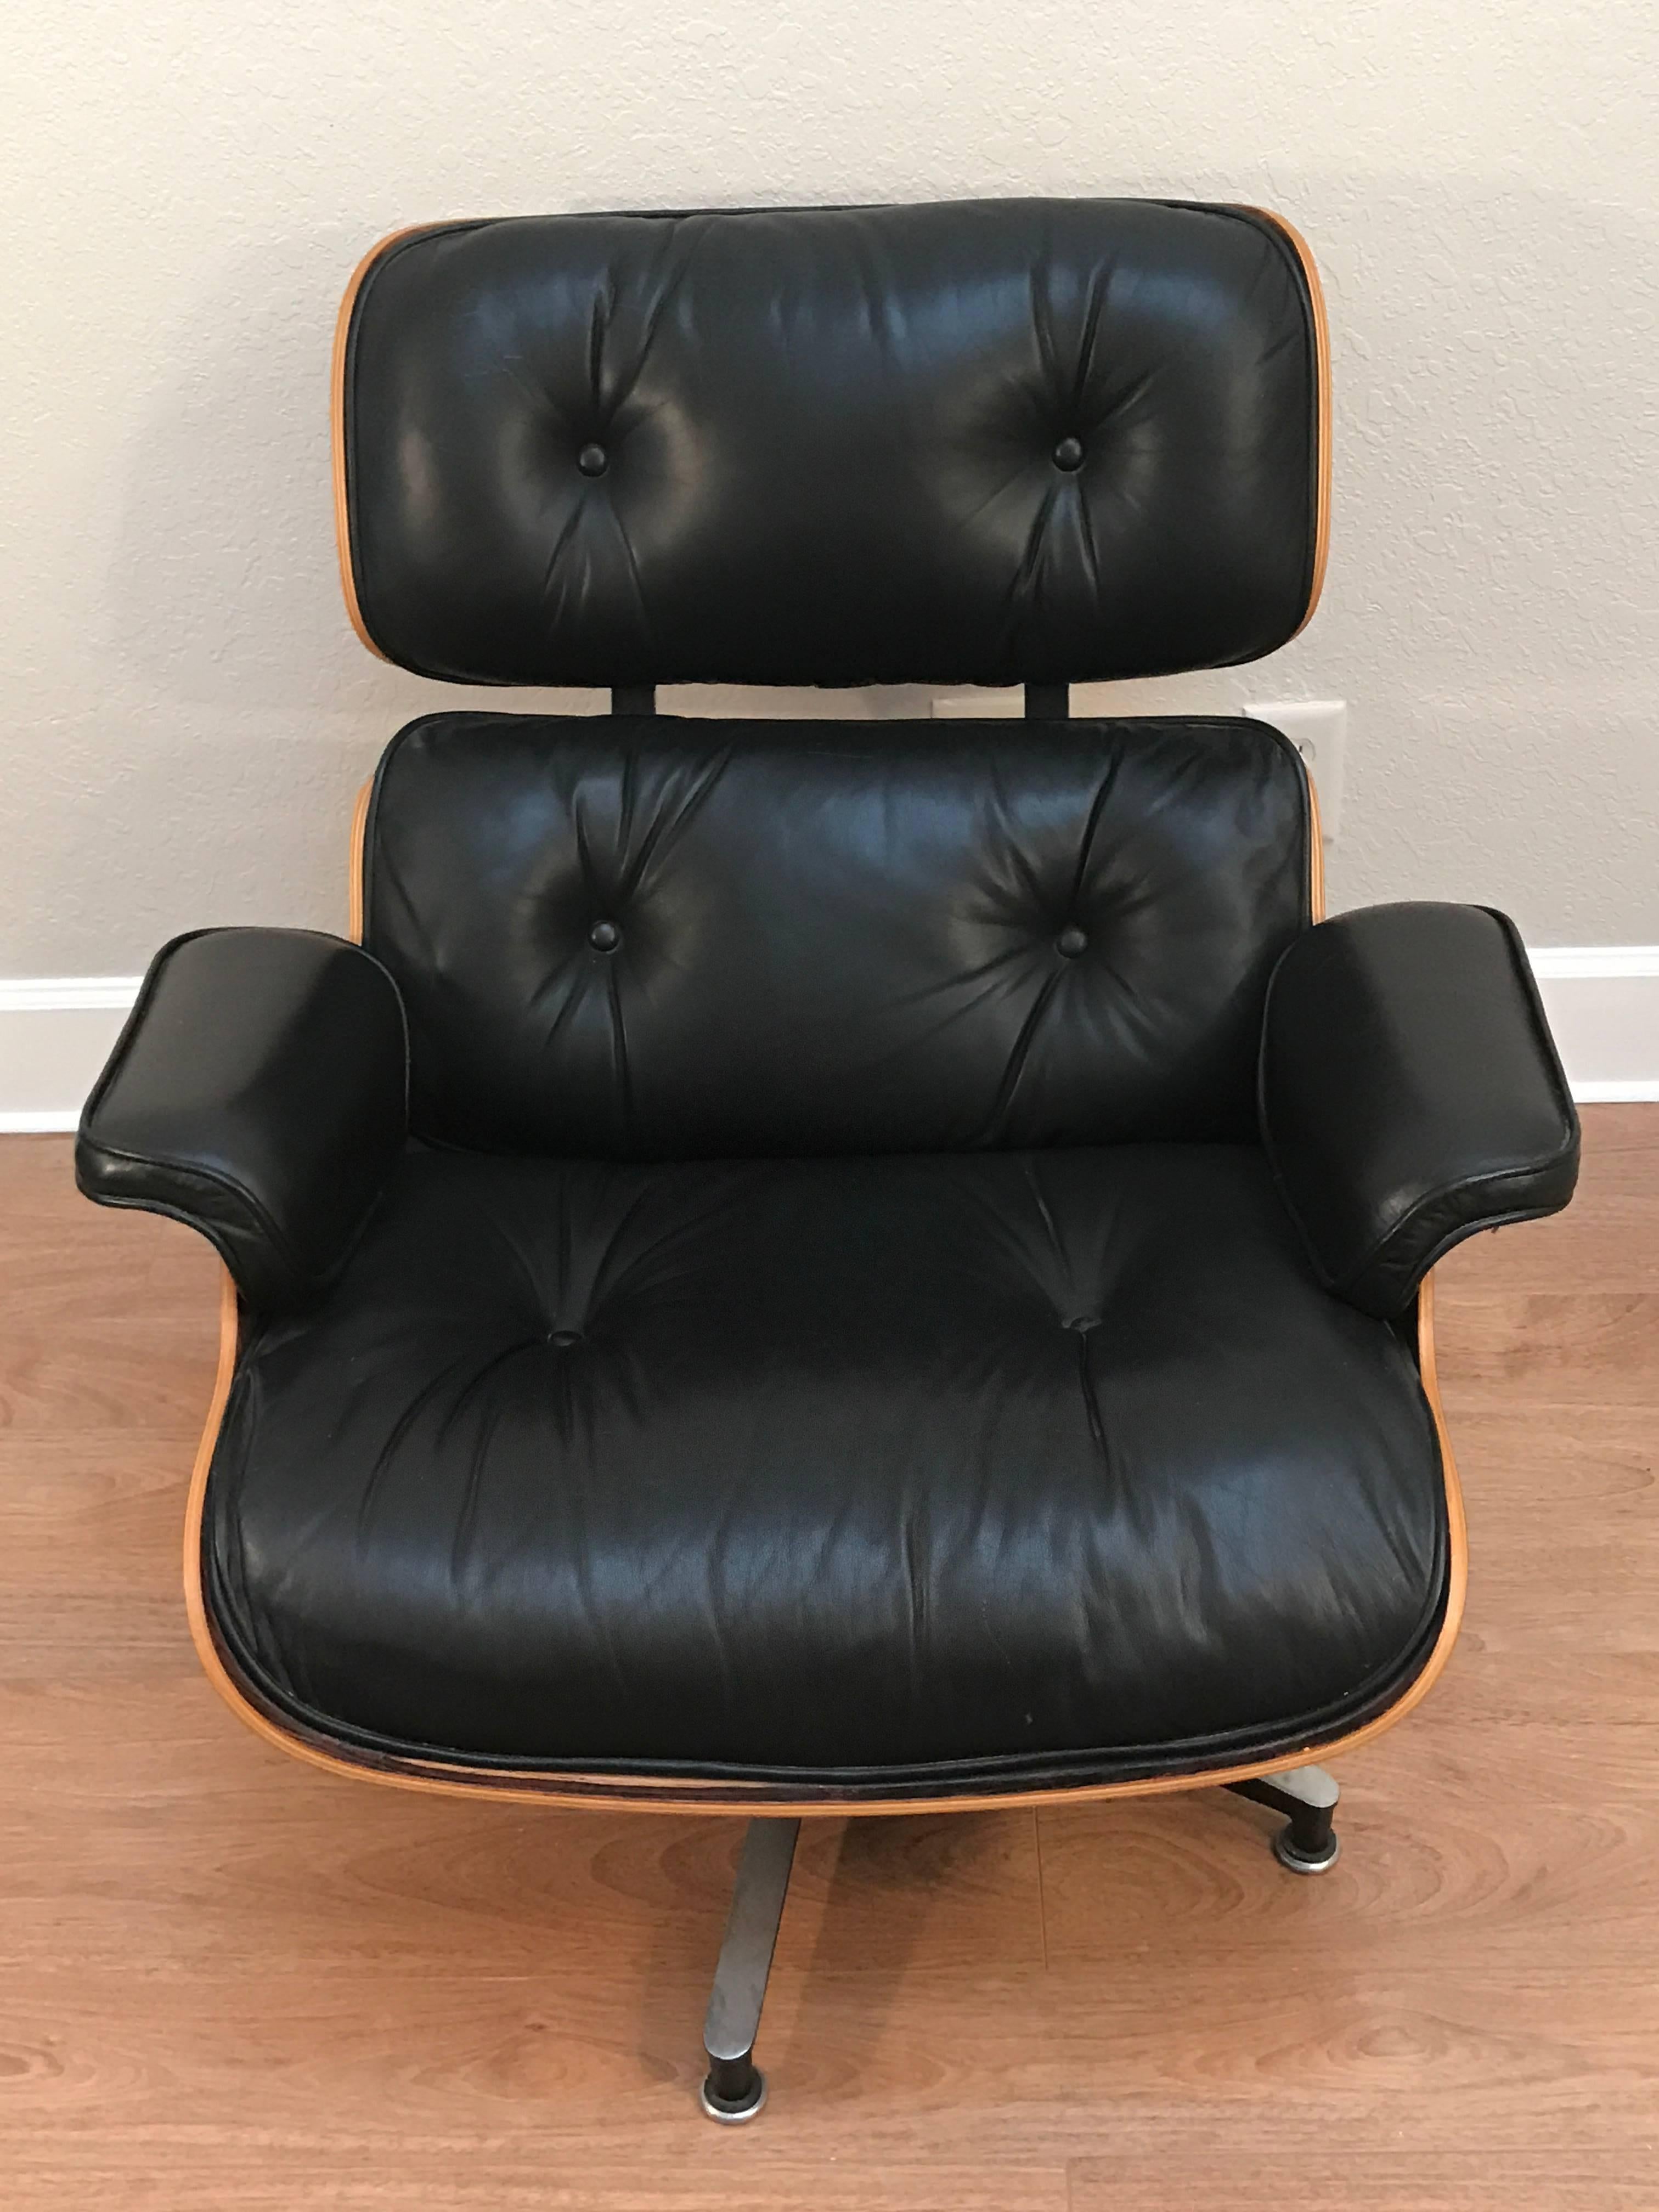 670 lounge chair and 671 ottoman by Charles and Ray Eames for Herman Miller in rosewood and leather. Near mint vintage condition

The ottoman measures: 17 inches H x 26 inches W x 23 inches D.